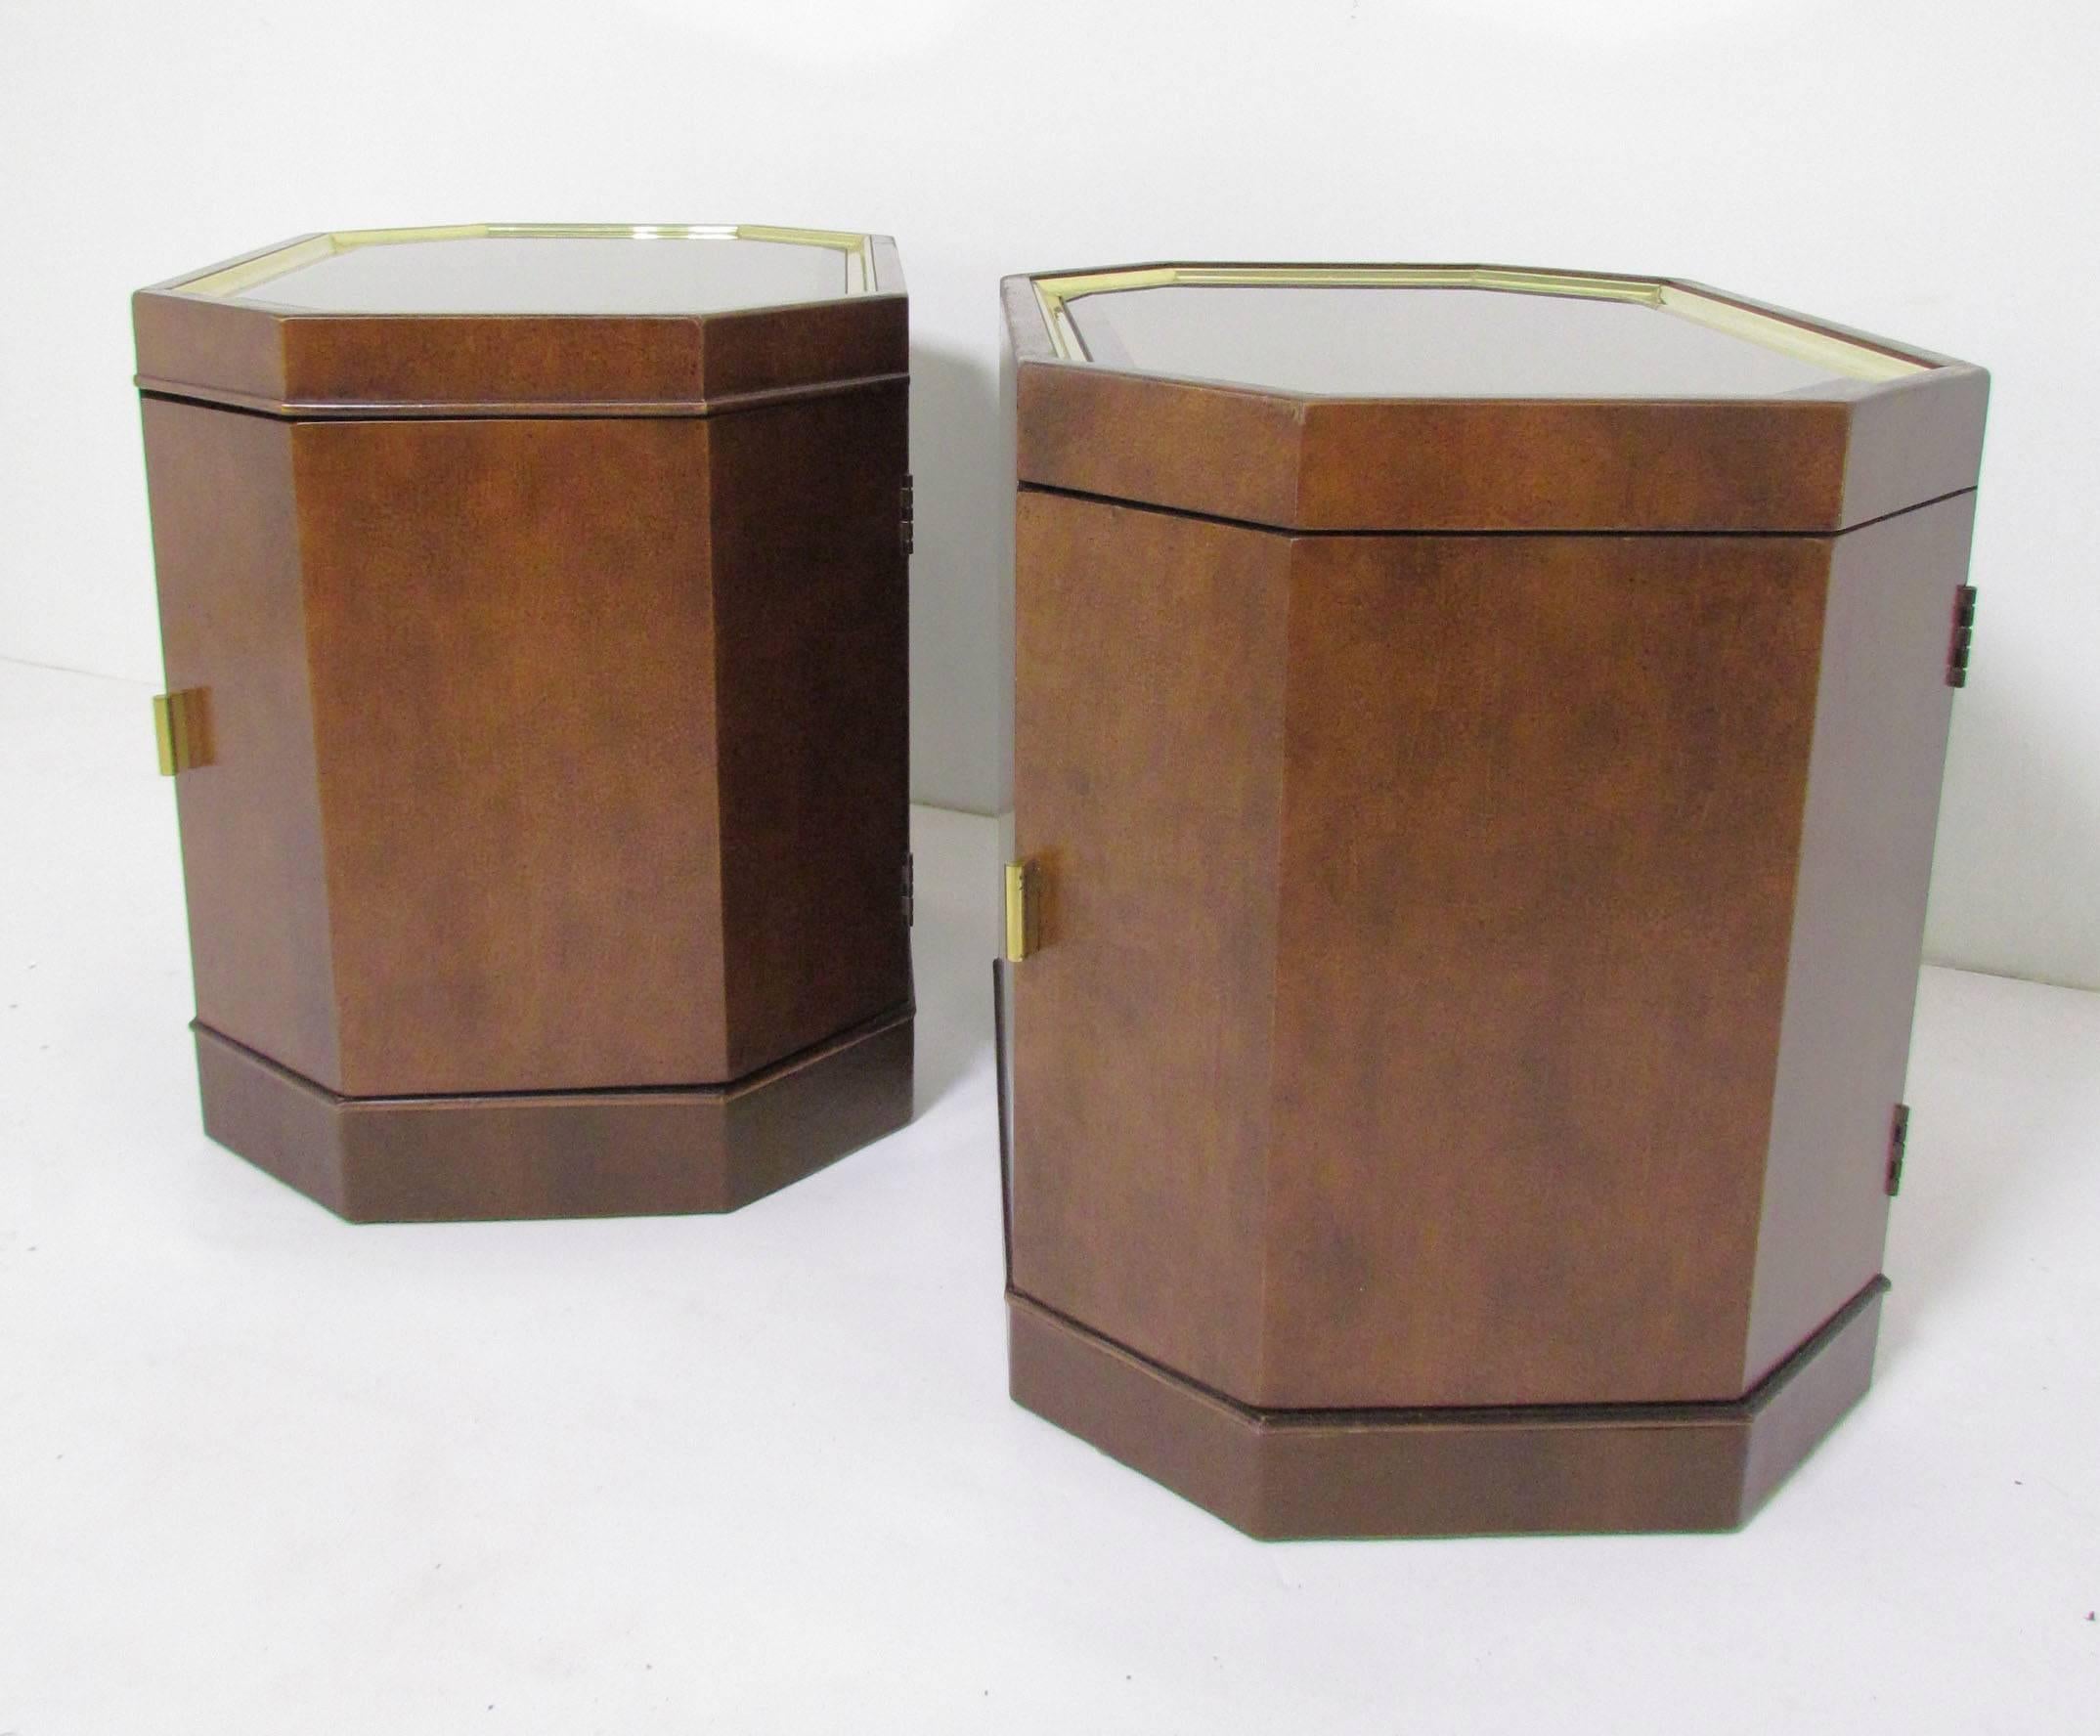 Pair of octagonal end tables with leather wrapped bases, brass handles and smoked mirrored tops, circa 1960s, in the manner of Harvey Probber.

Slight variance in design in that one has a small band of wood trim above the door. This minor